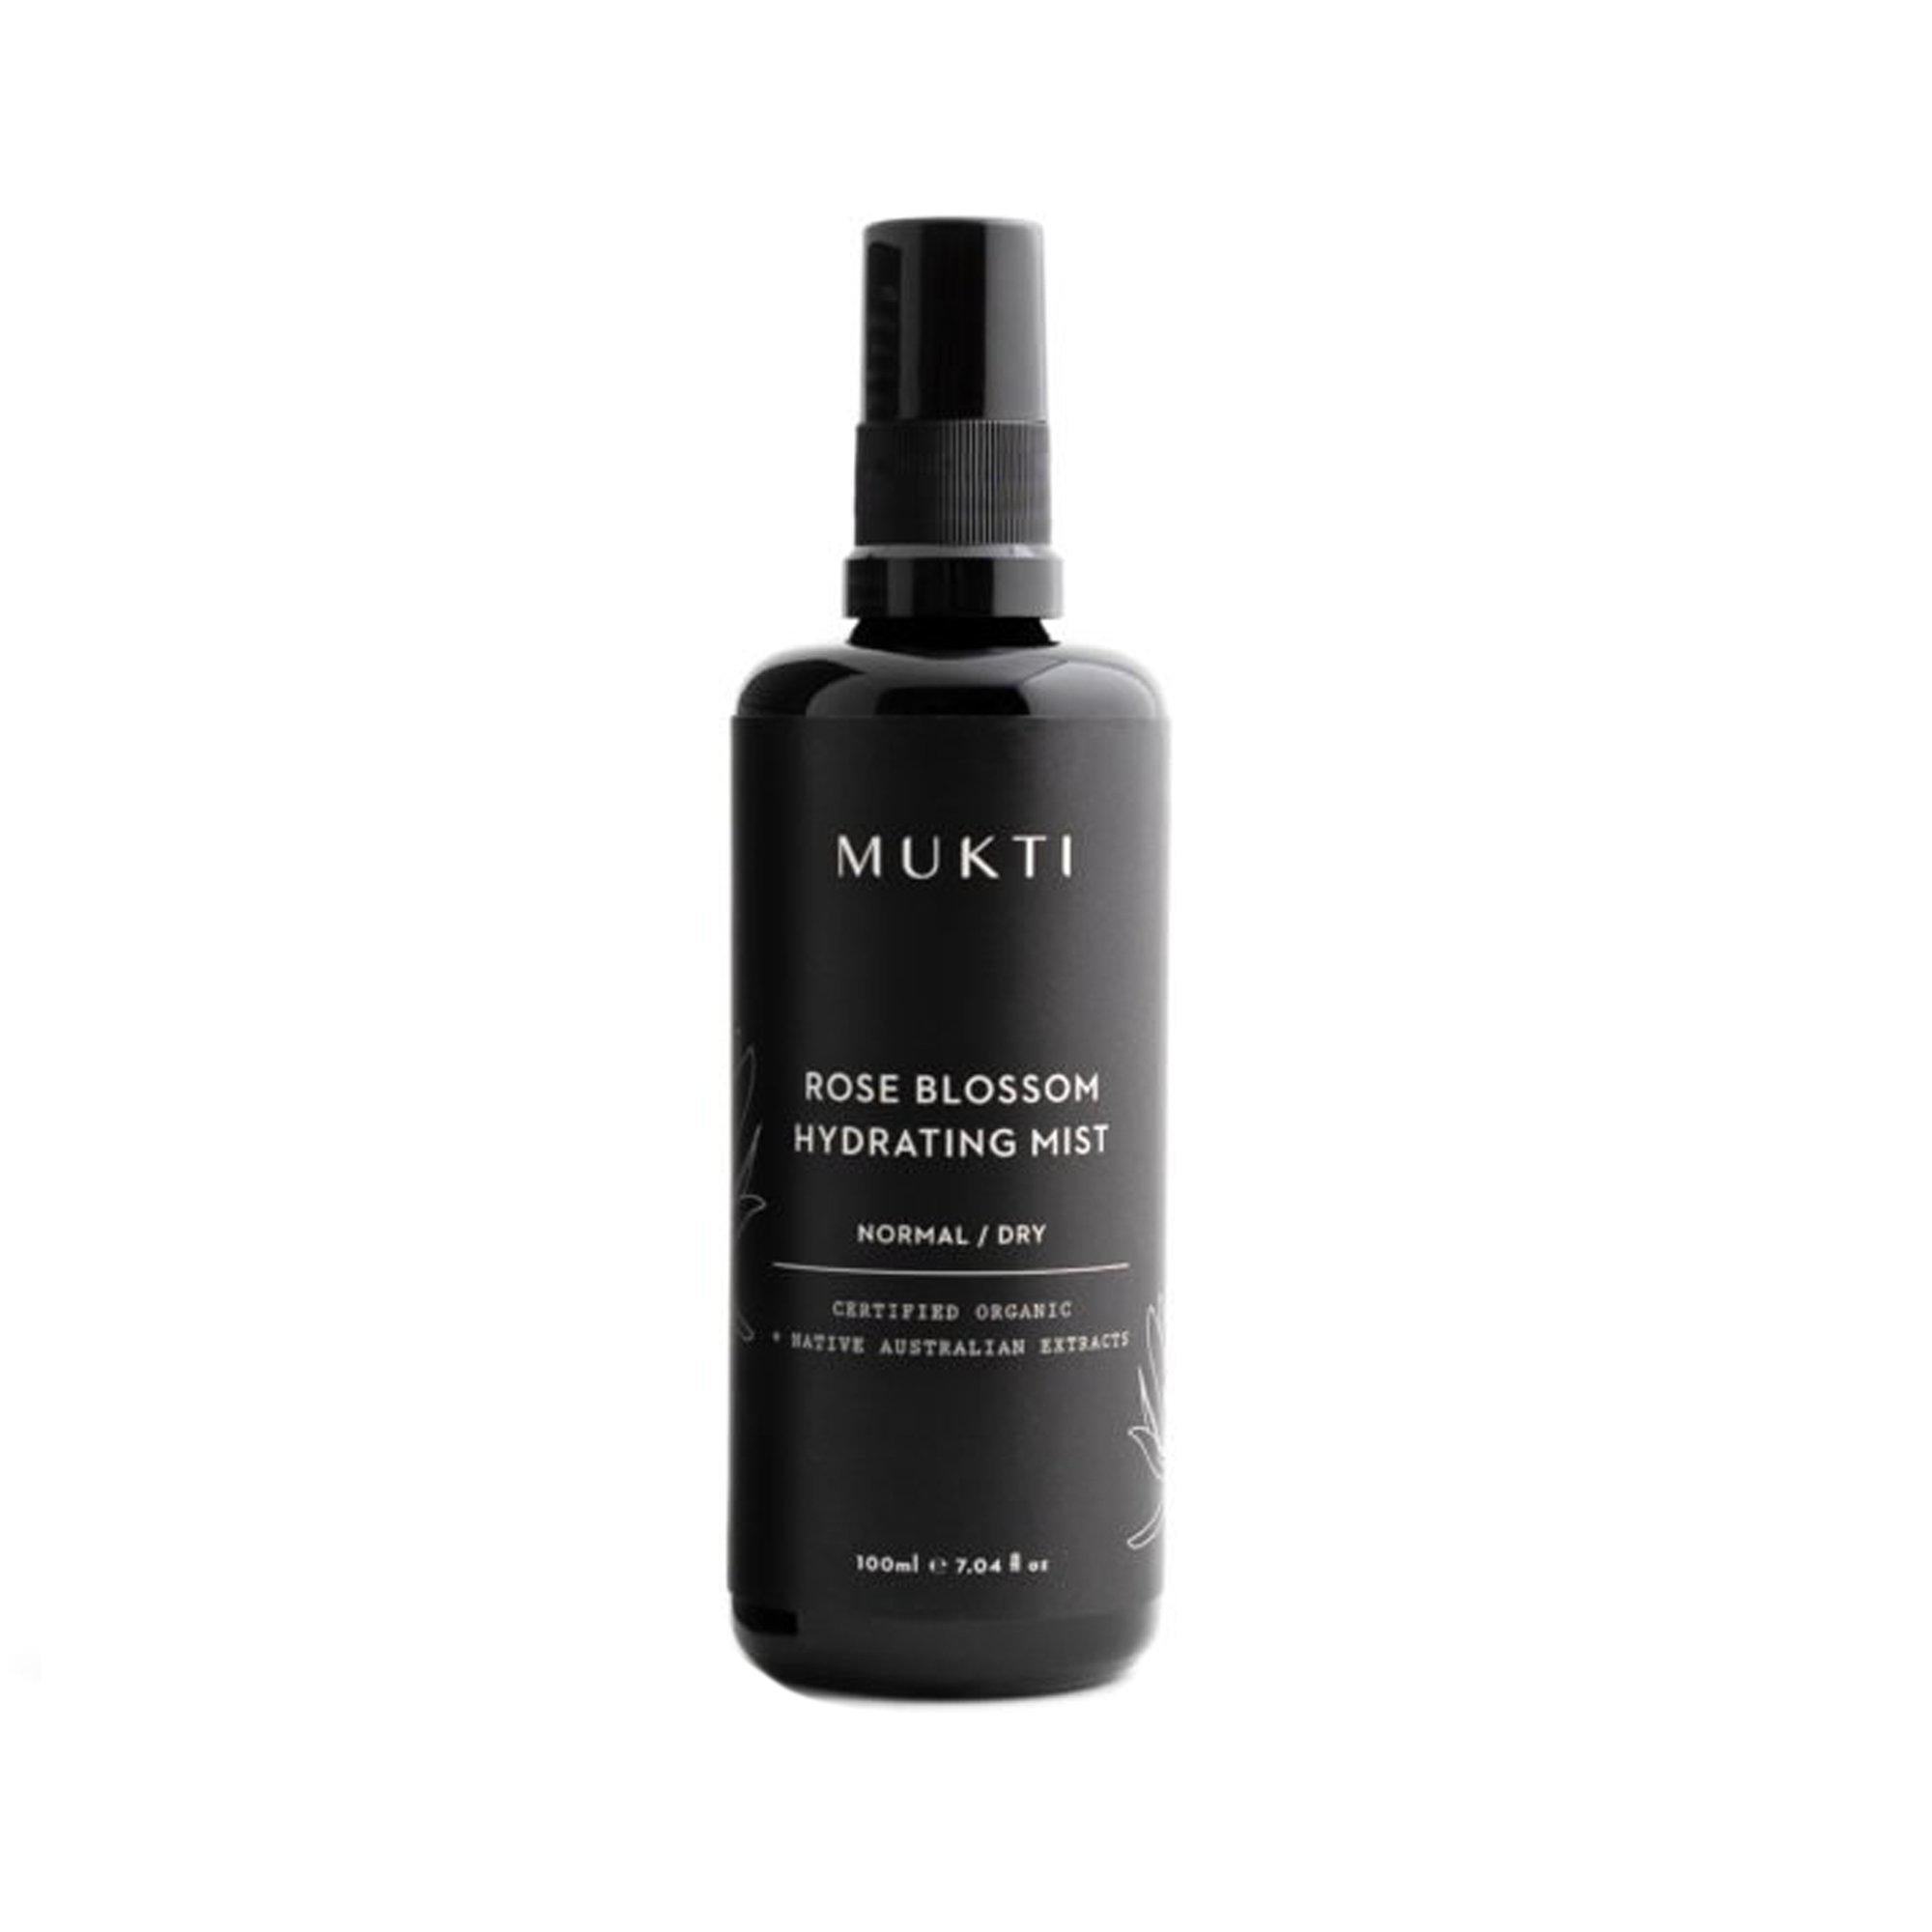 Indisponible : Rose Blossom Hydrating Mist Nicht verfügbar: Rose Blossom Hydrating Mist - Mukti Organics